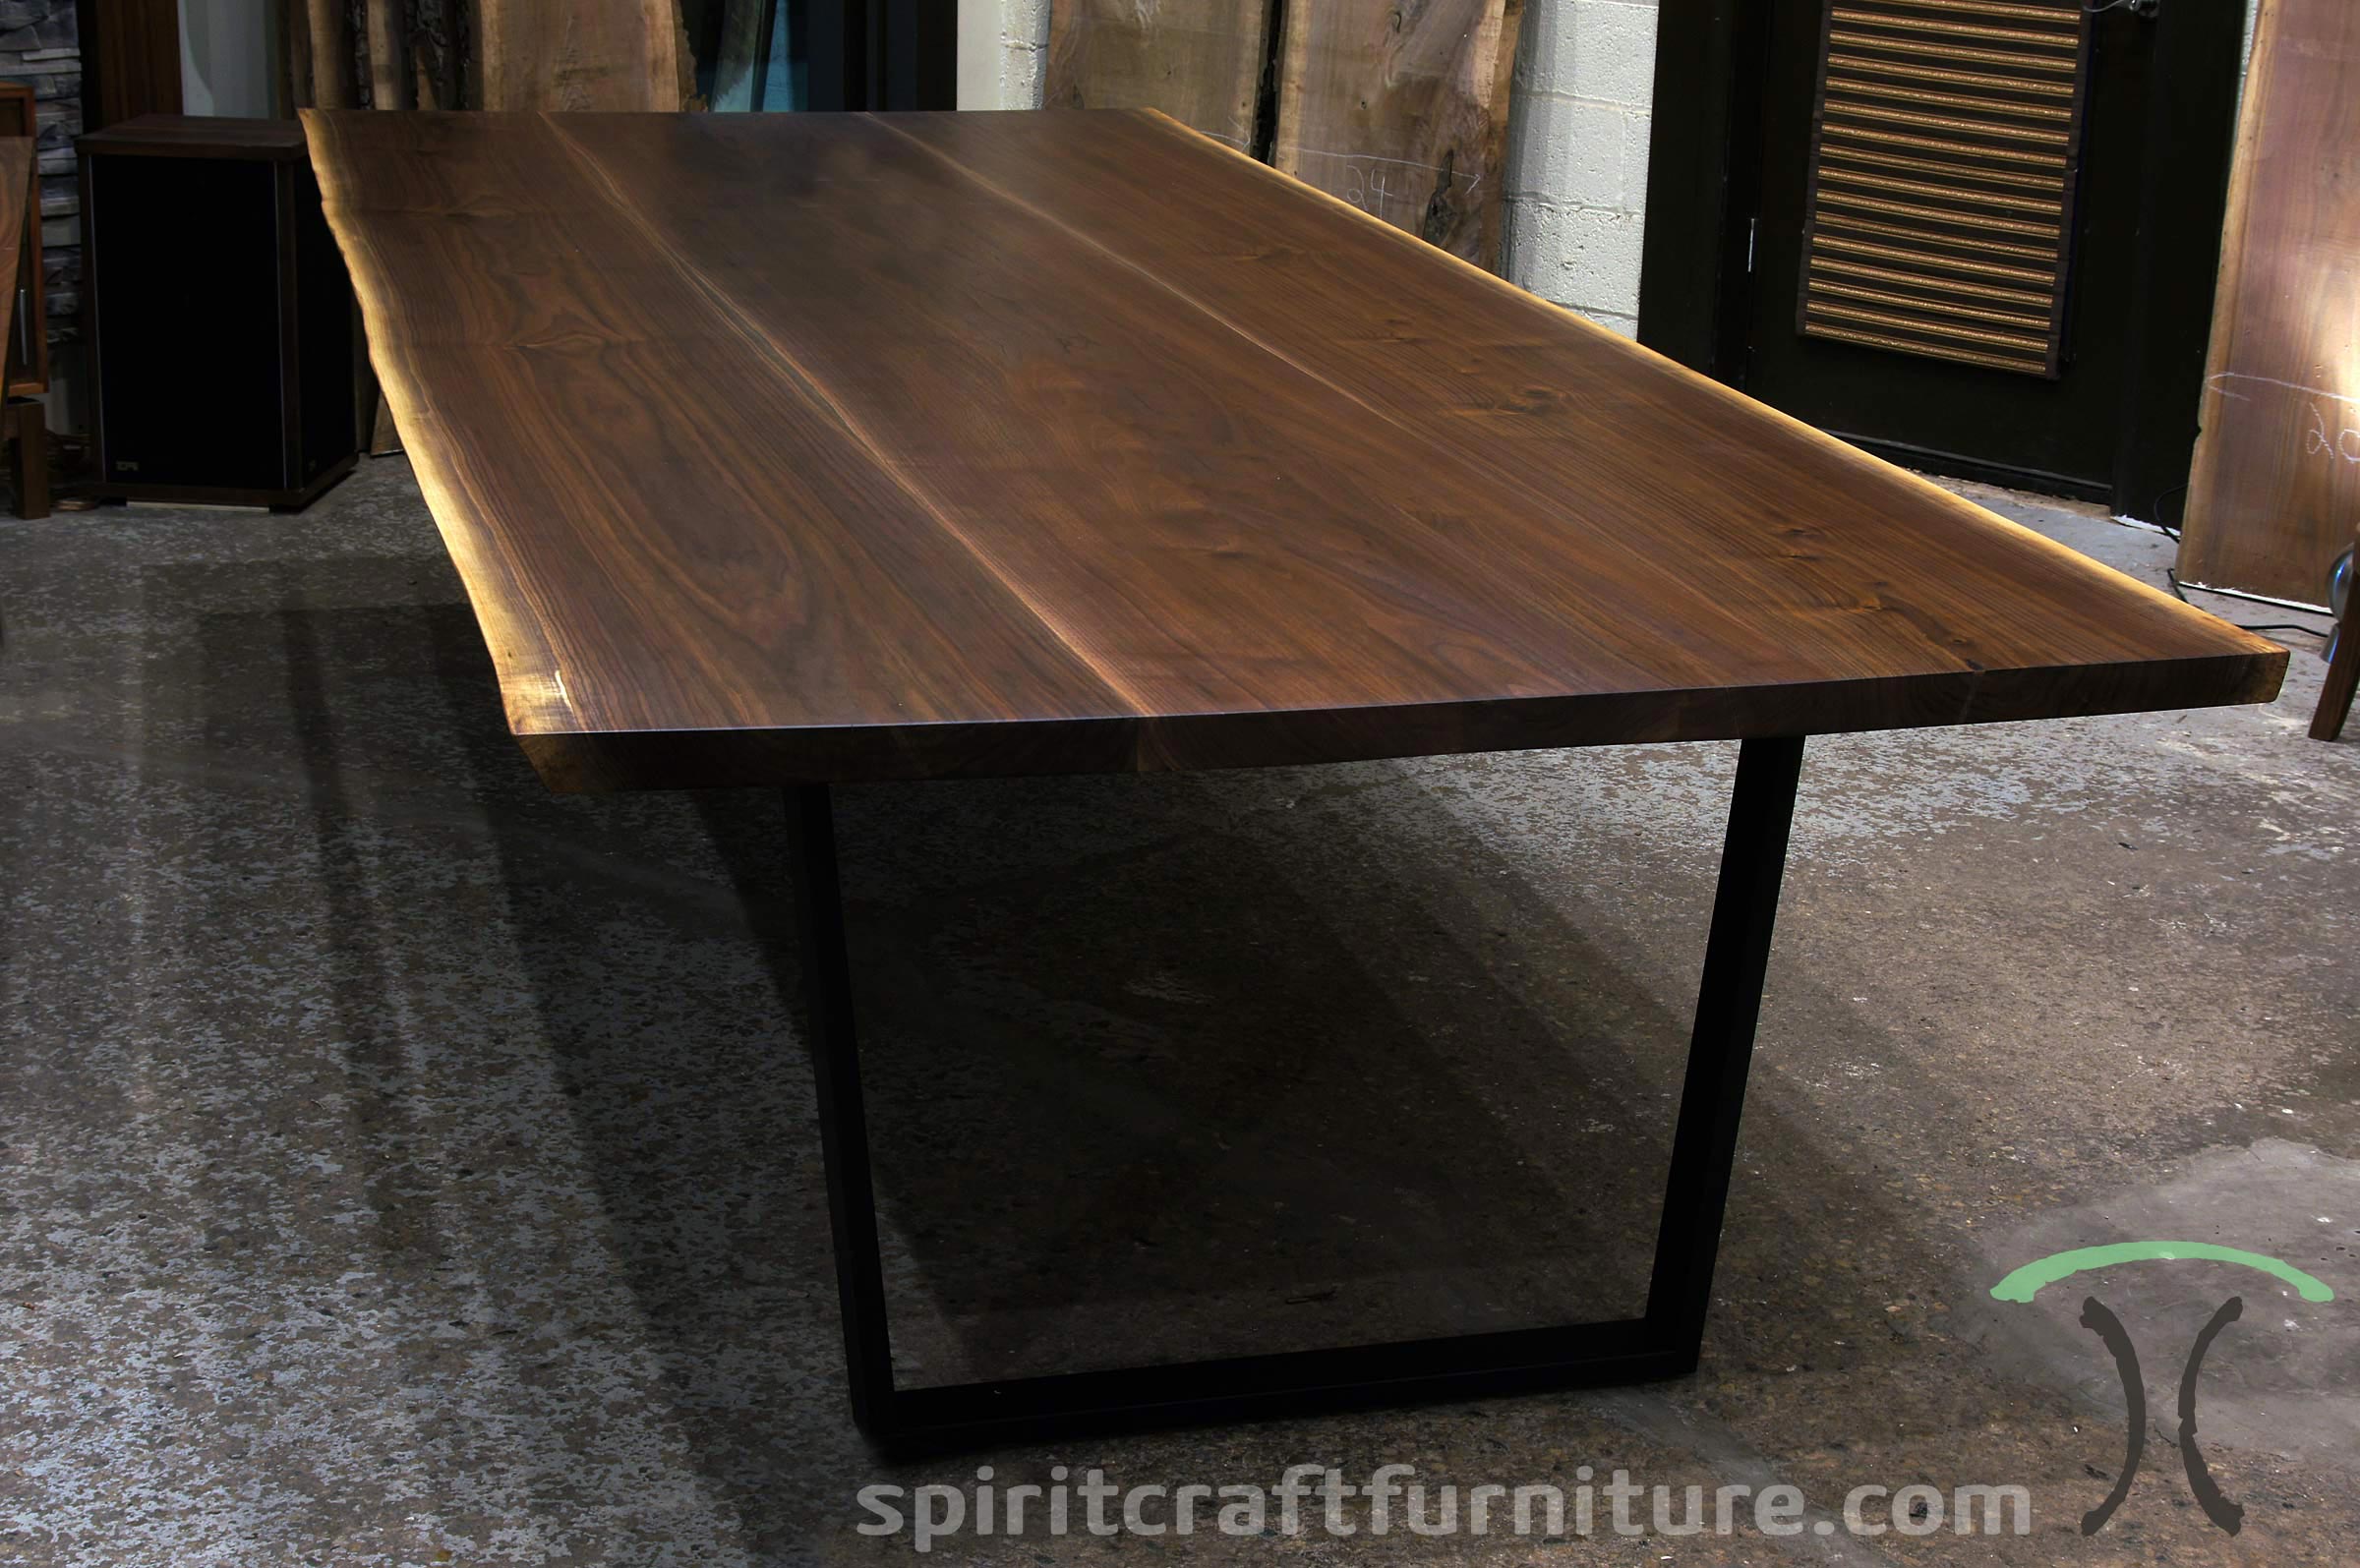 Live Edge Wood Slab Conference Room Tables And Desk Tops